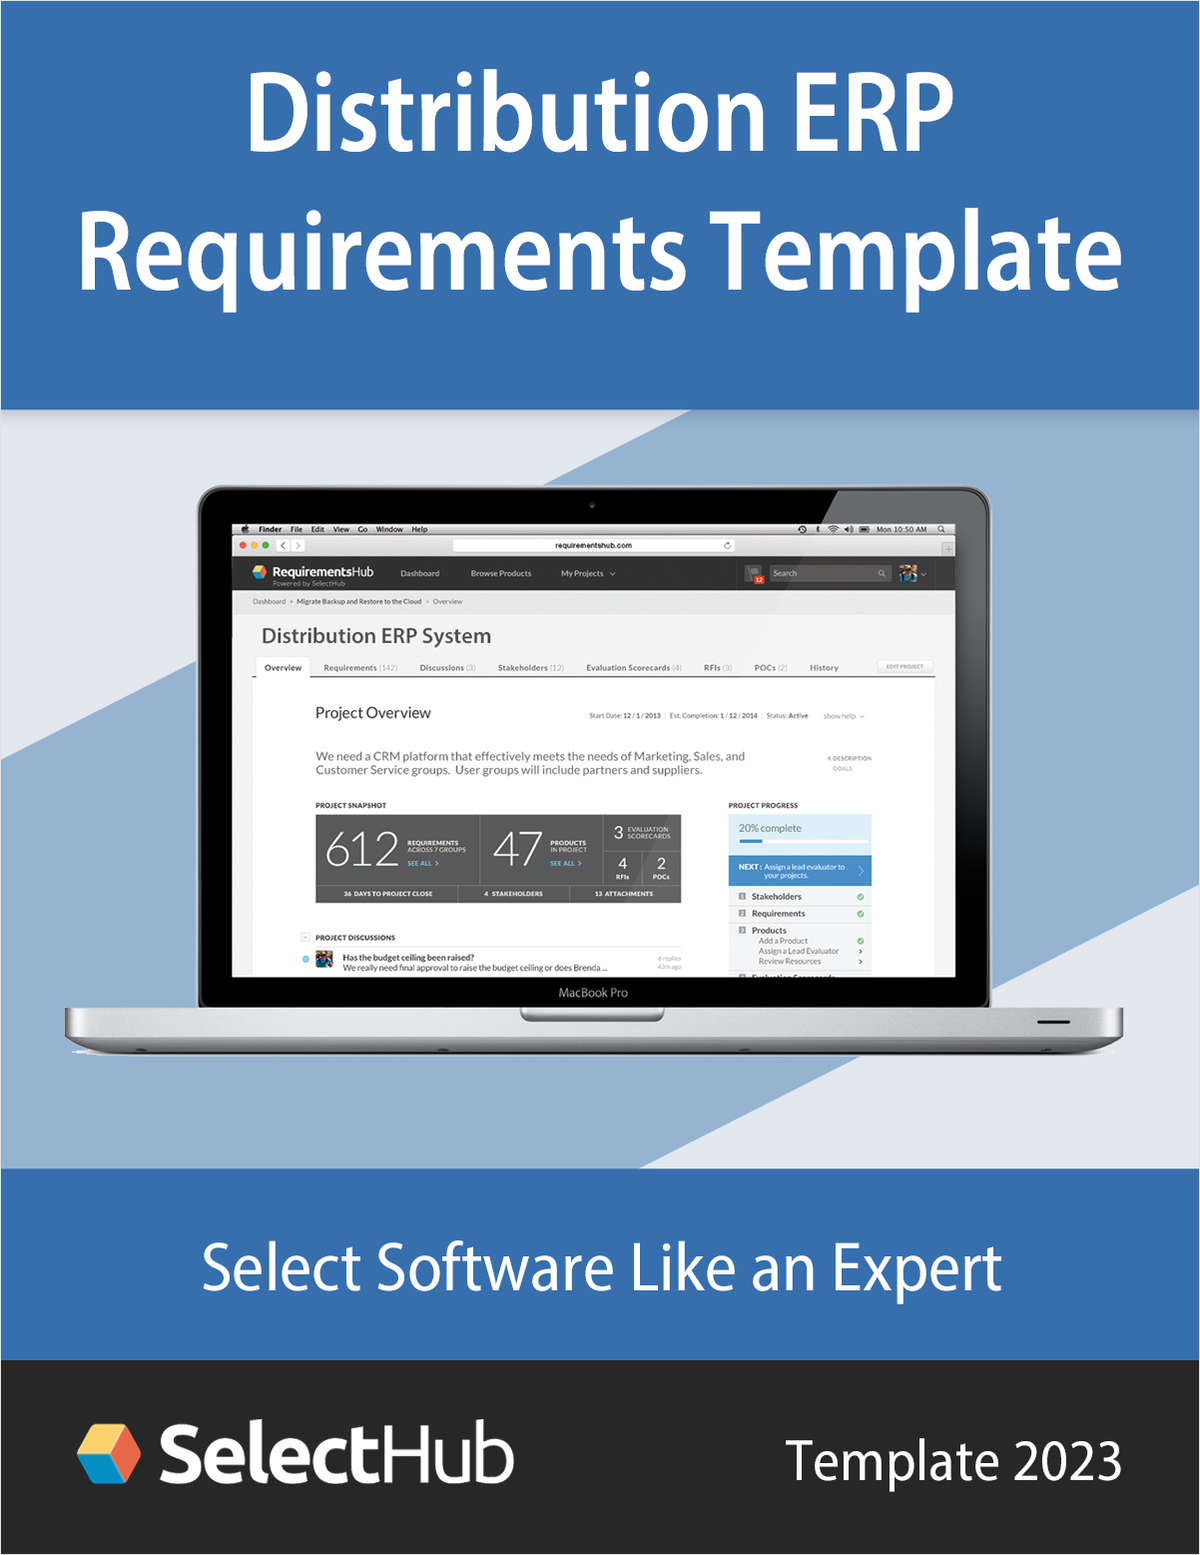 Distribution ERP Software Requirements Template for 2023